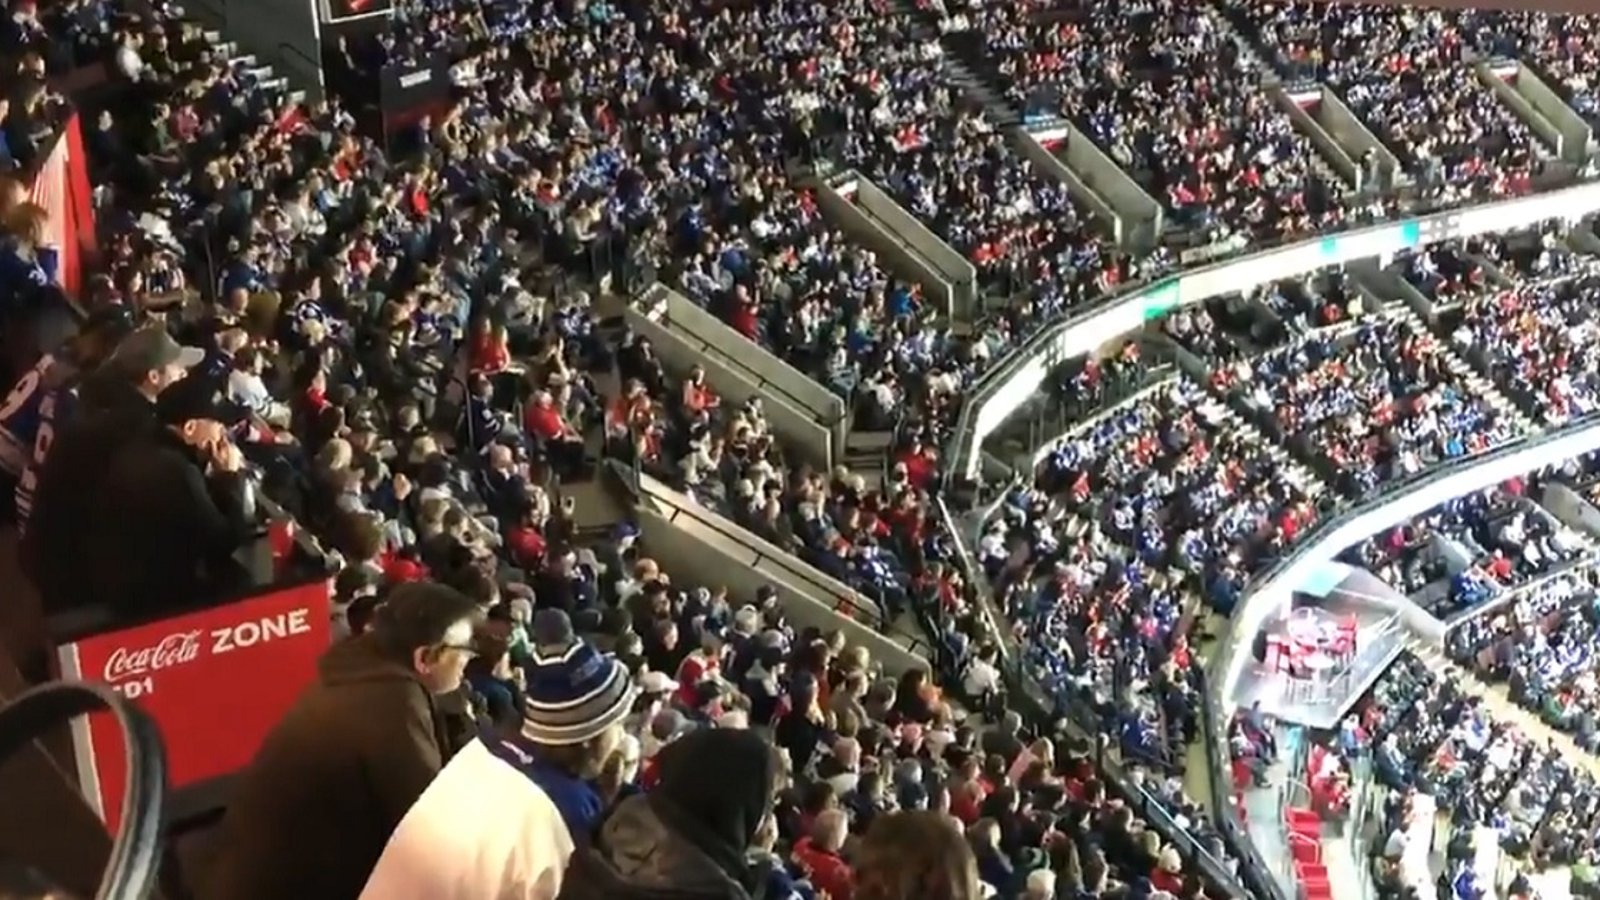 Leaf fans start chant to mock the Sens.... but the Sens fans join in!